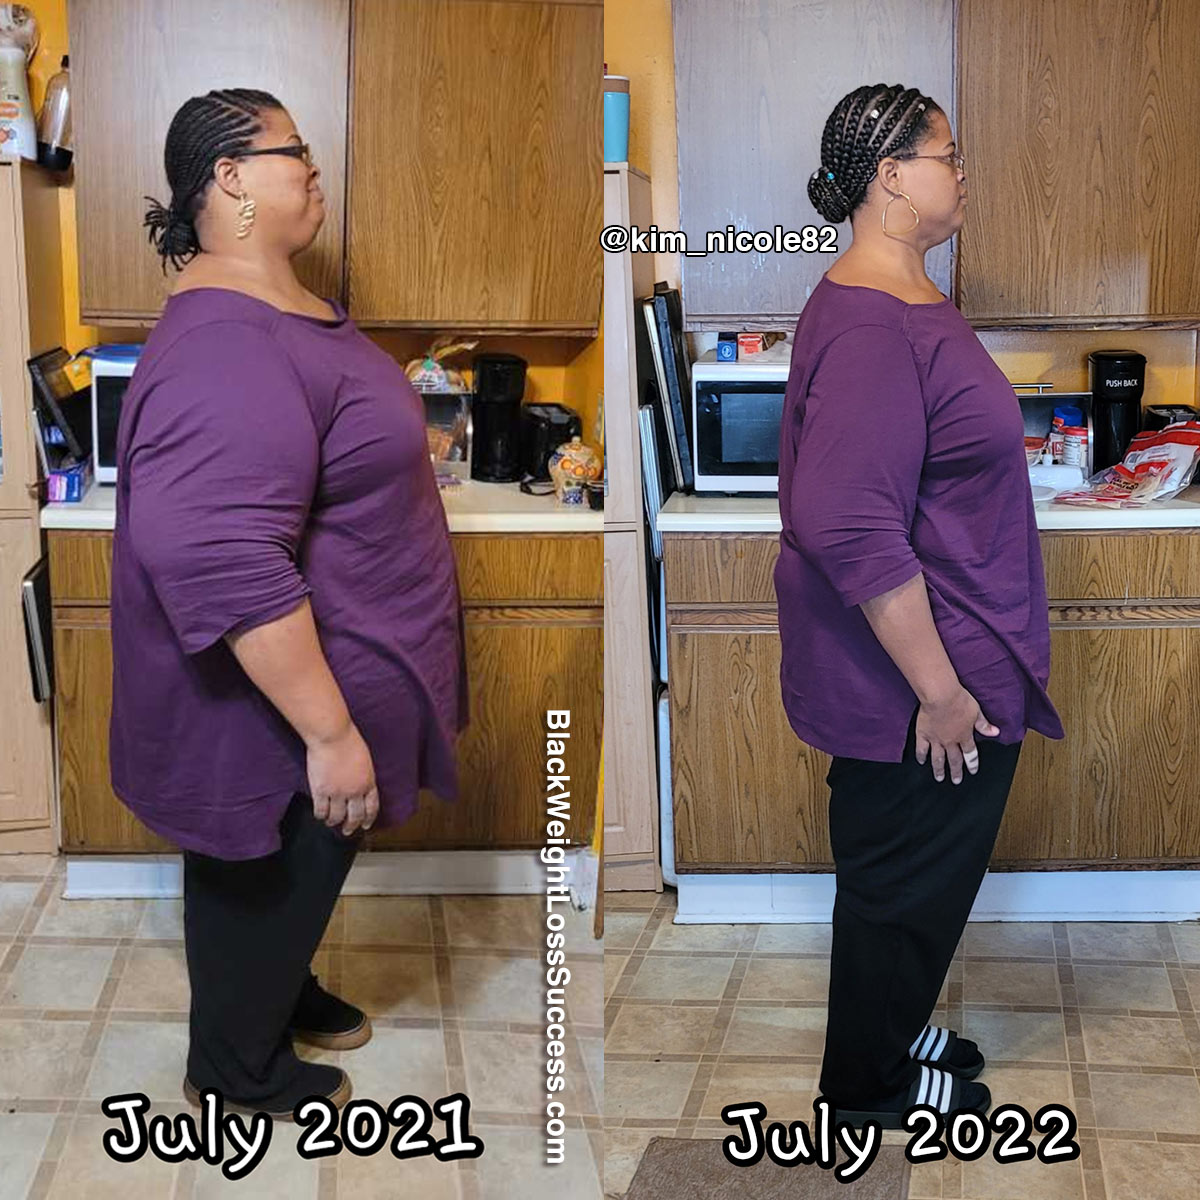 Kimberly before and after weight loss